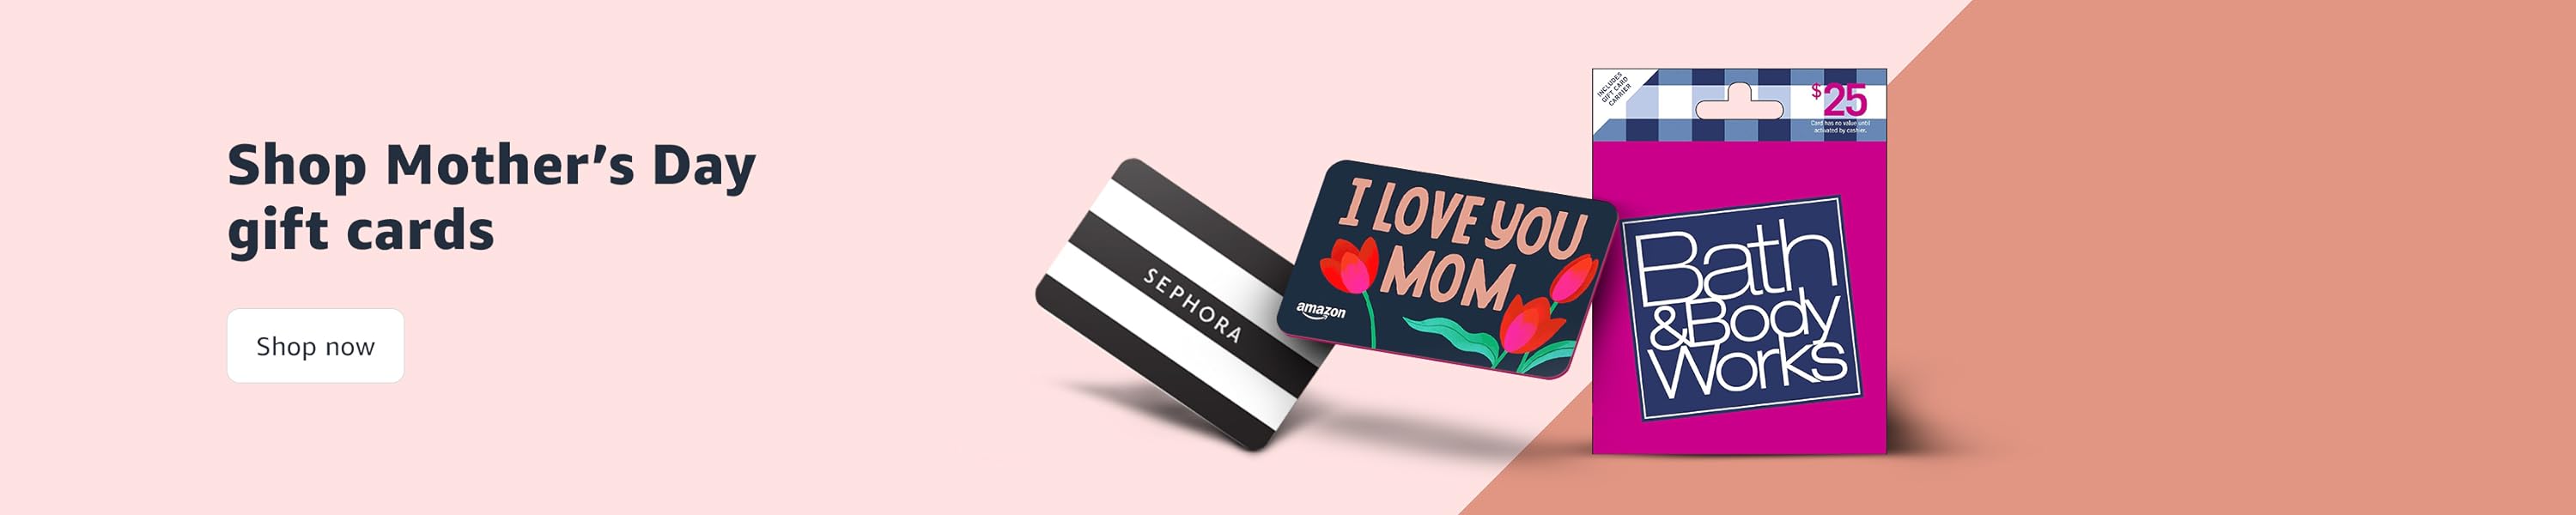 Shop Mother's Day gift cards